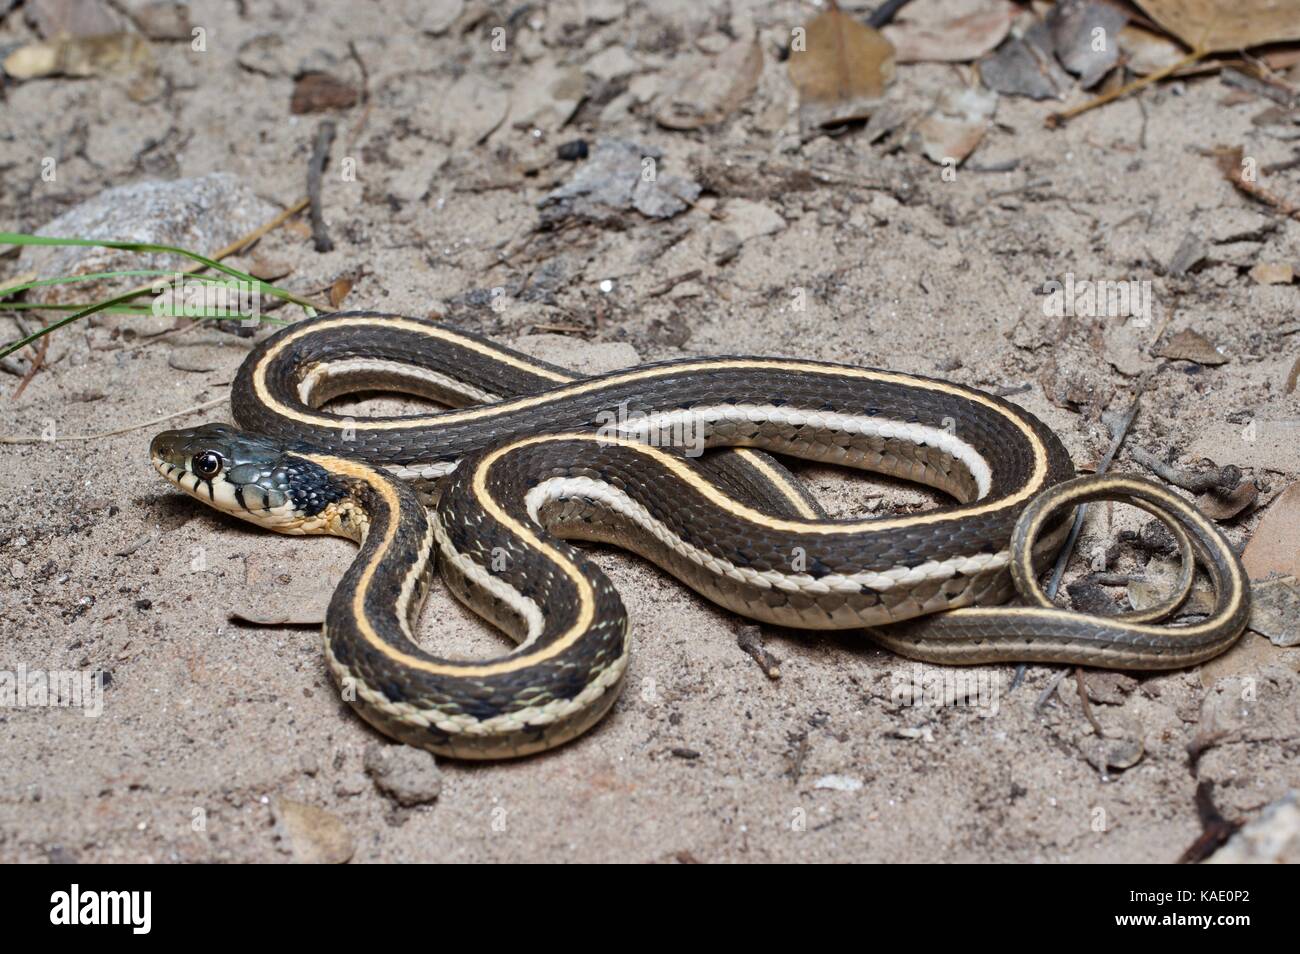 A Western Black-necked Gartersnake (Thamnophis cyrtopsis cyrtopsis) coiled in the sandy desert in southern Arizona, USA Stock Photo